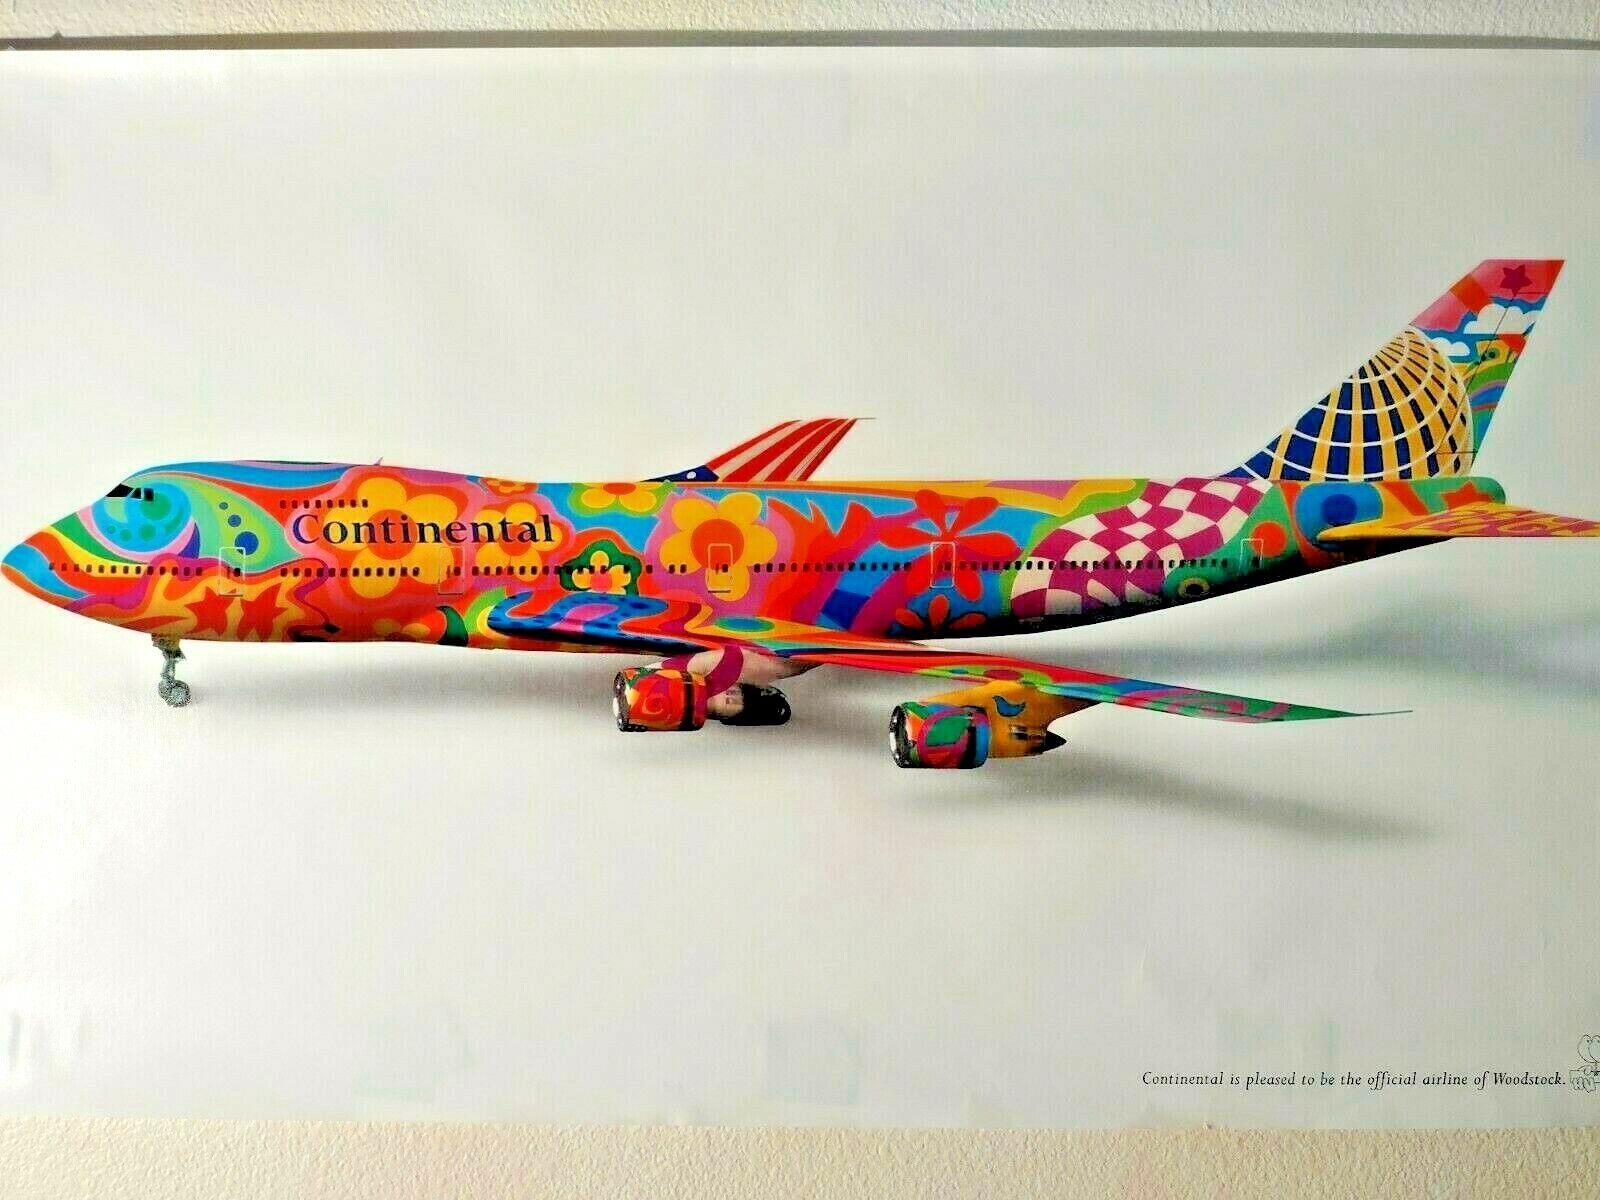  CONTINENTAL AIRLINES POSTER  B 747 1994 WOODSTOCK 23 X 14 